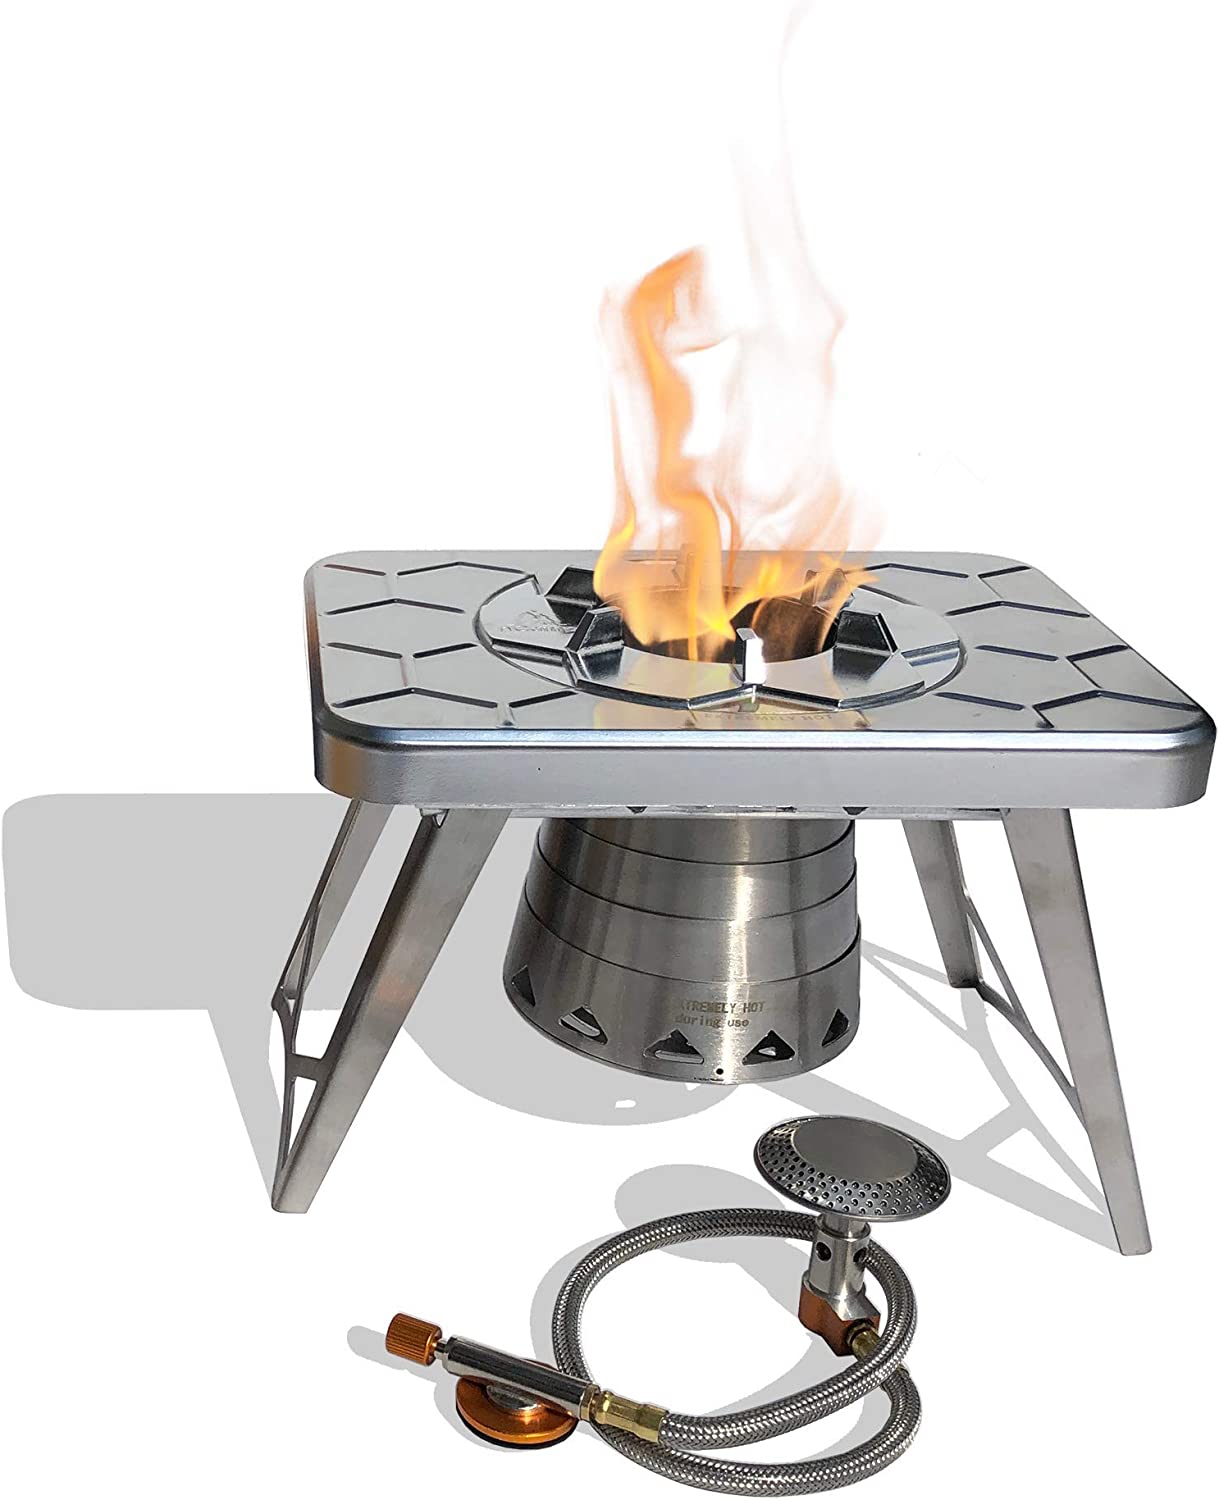 nCamp Stove Plus-Camping stoves and cooking gear